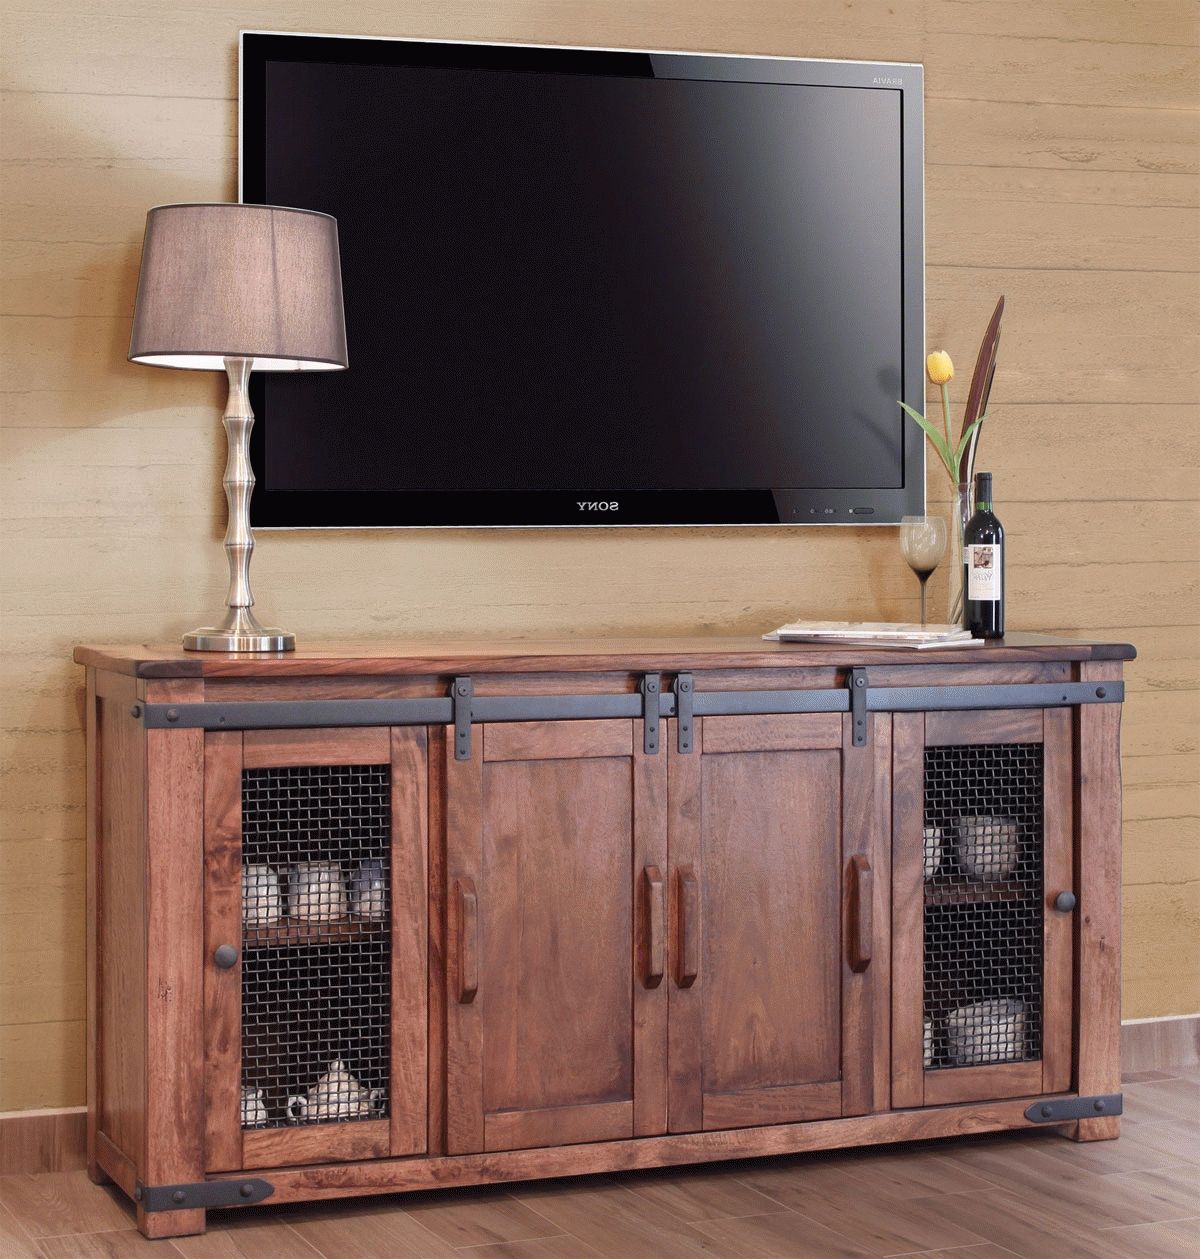 Rustic Tv Stand, Wood Tv Stand, Pine Tv Stand Regarding Rustic Pine Tv Cabinets (View 4 of 20)